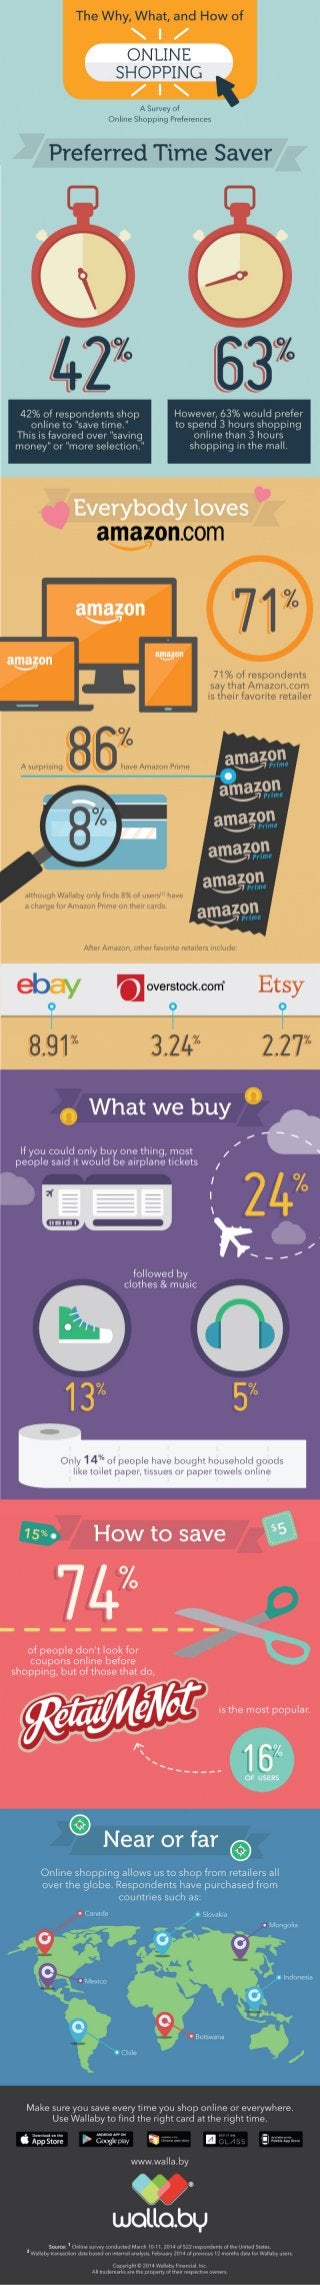 The Why, What, and How of Online Shopping